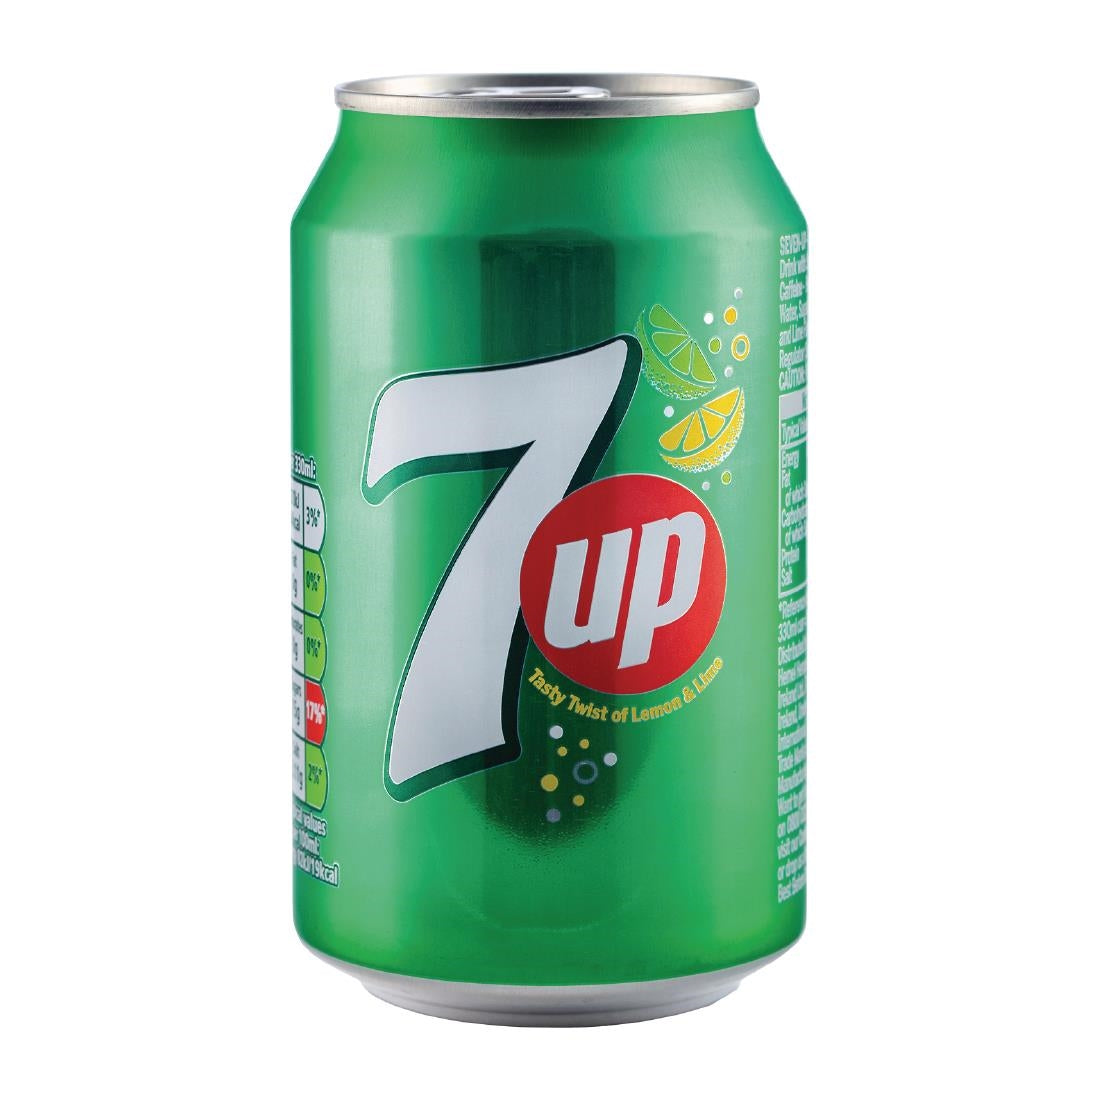 FW836 7up Cans 330ml (Pack of 24) JD Catering Equipment Solutions Ltd